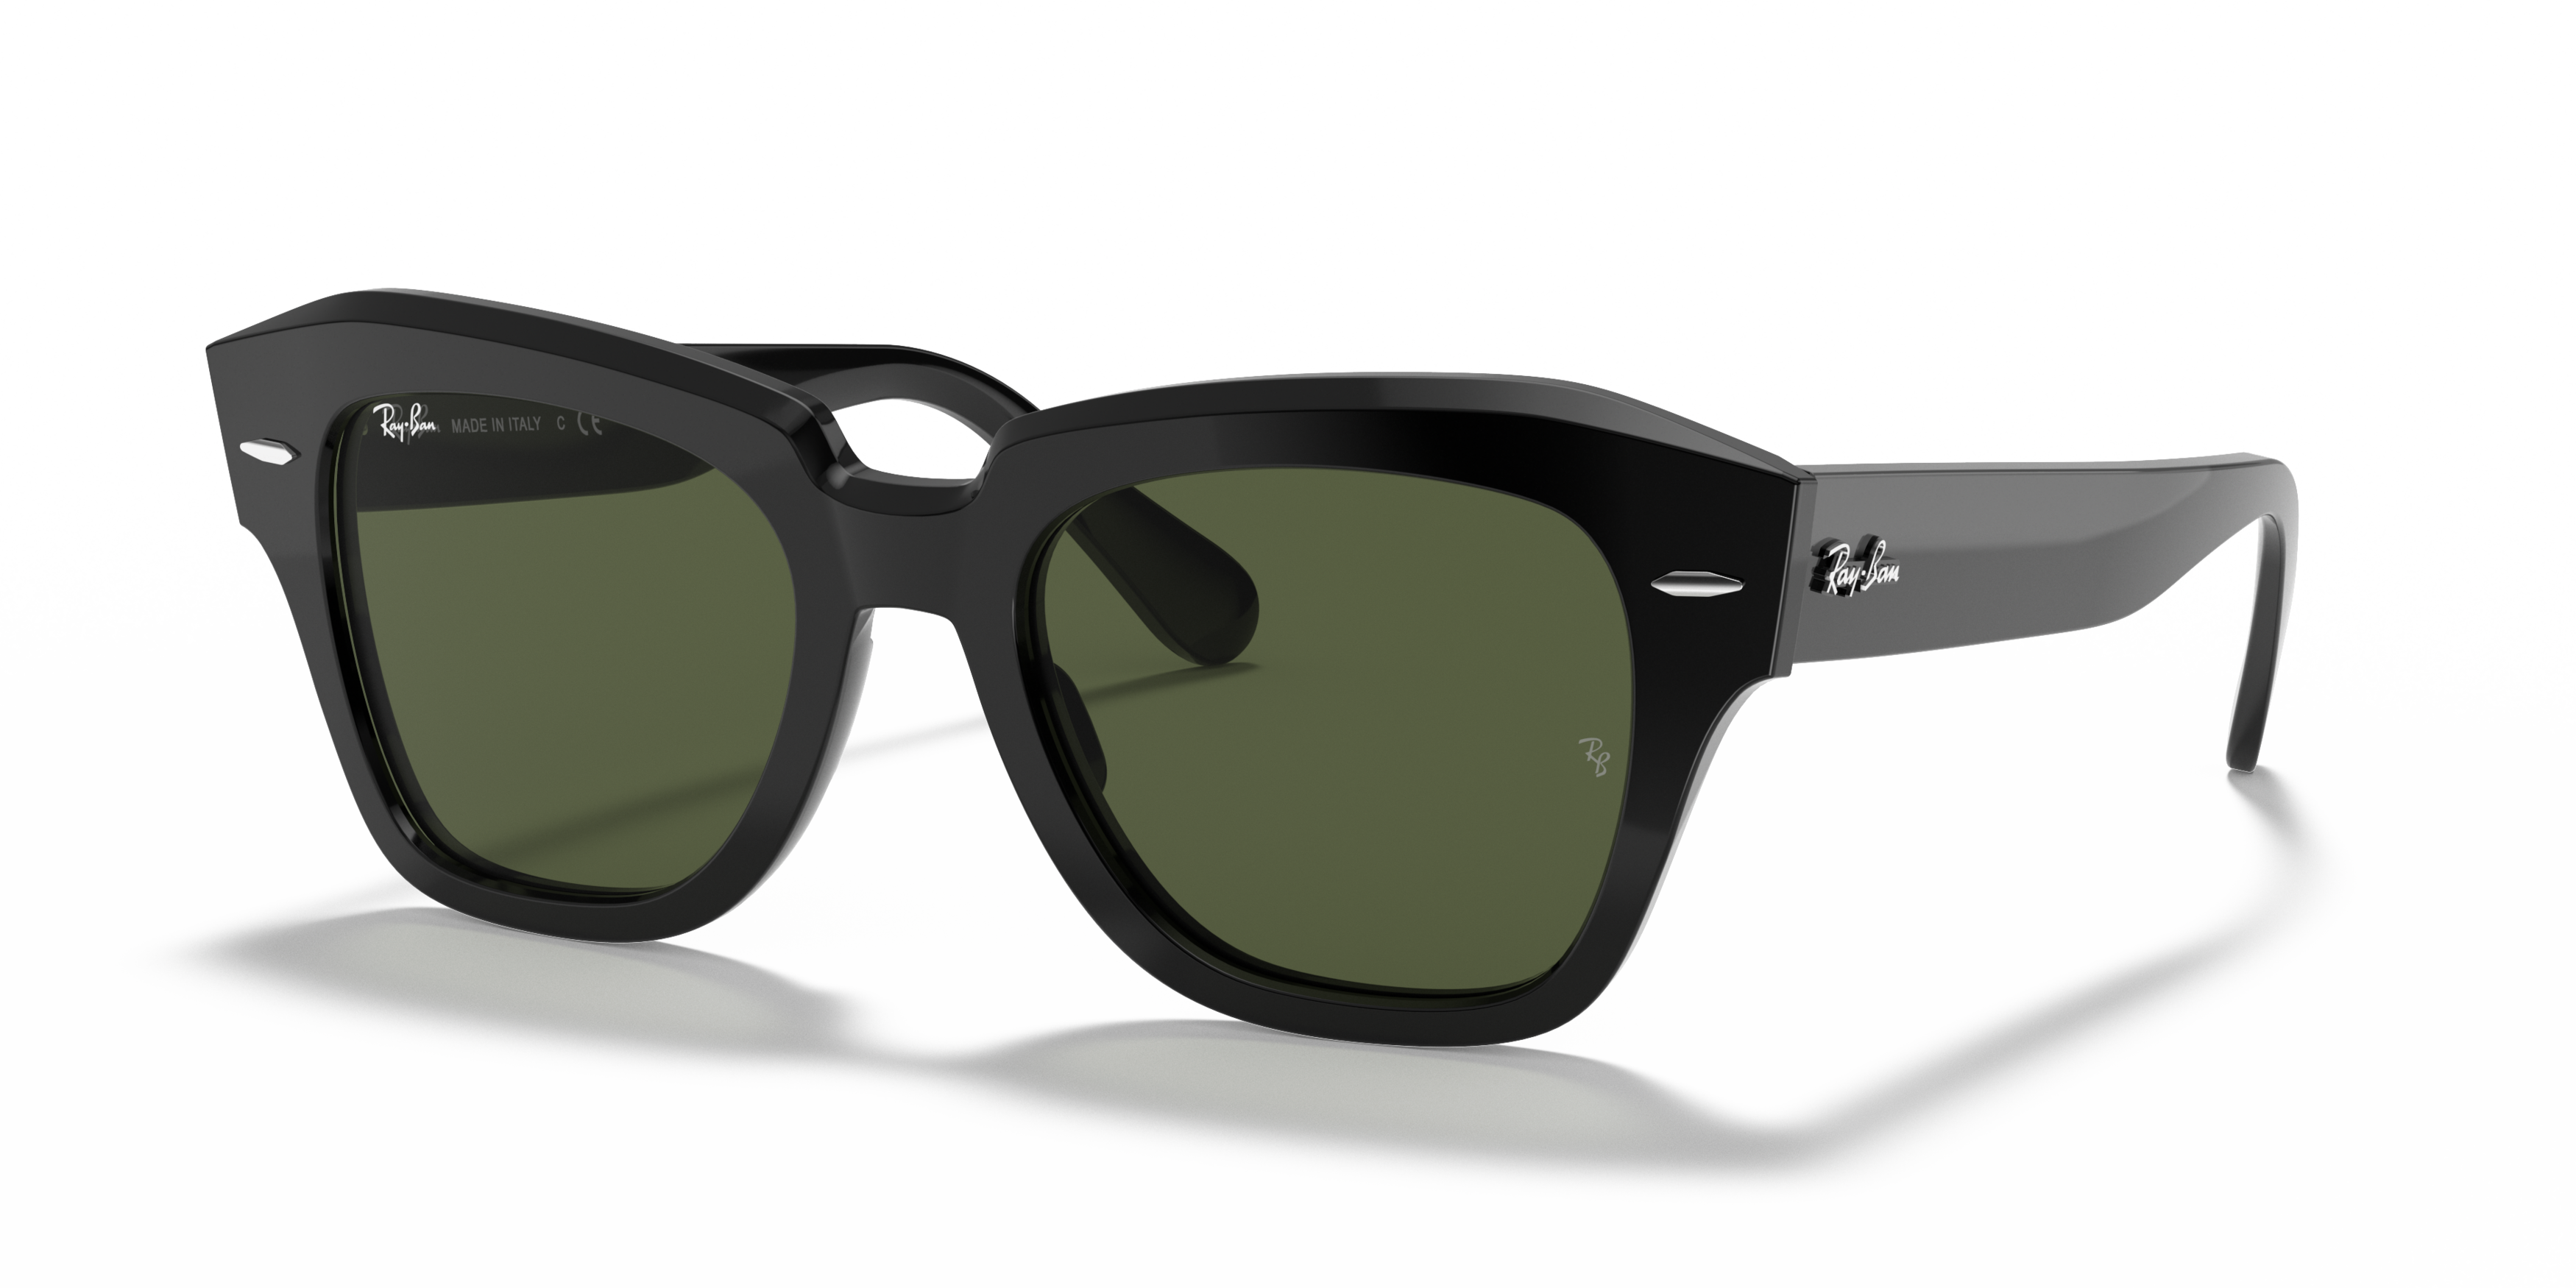 Angle_Left01 Ray-Ban State Street RB 2186 (901/31) Sunglasses Green / Black